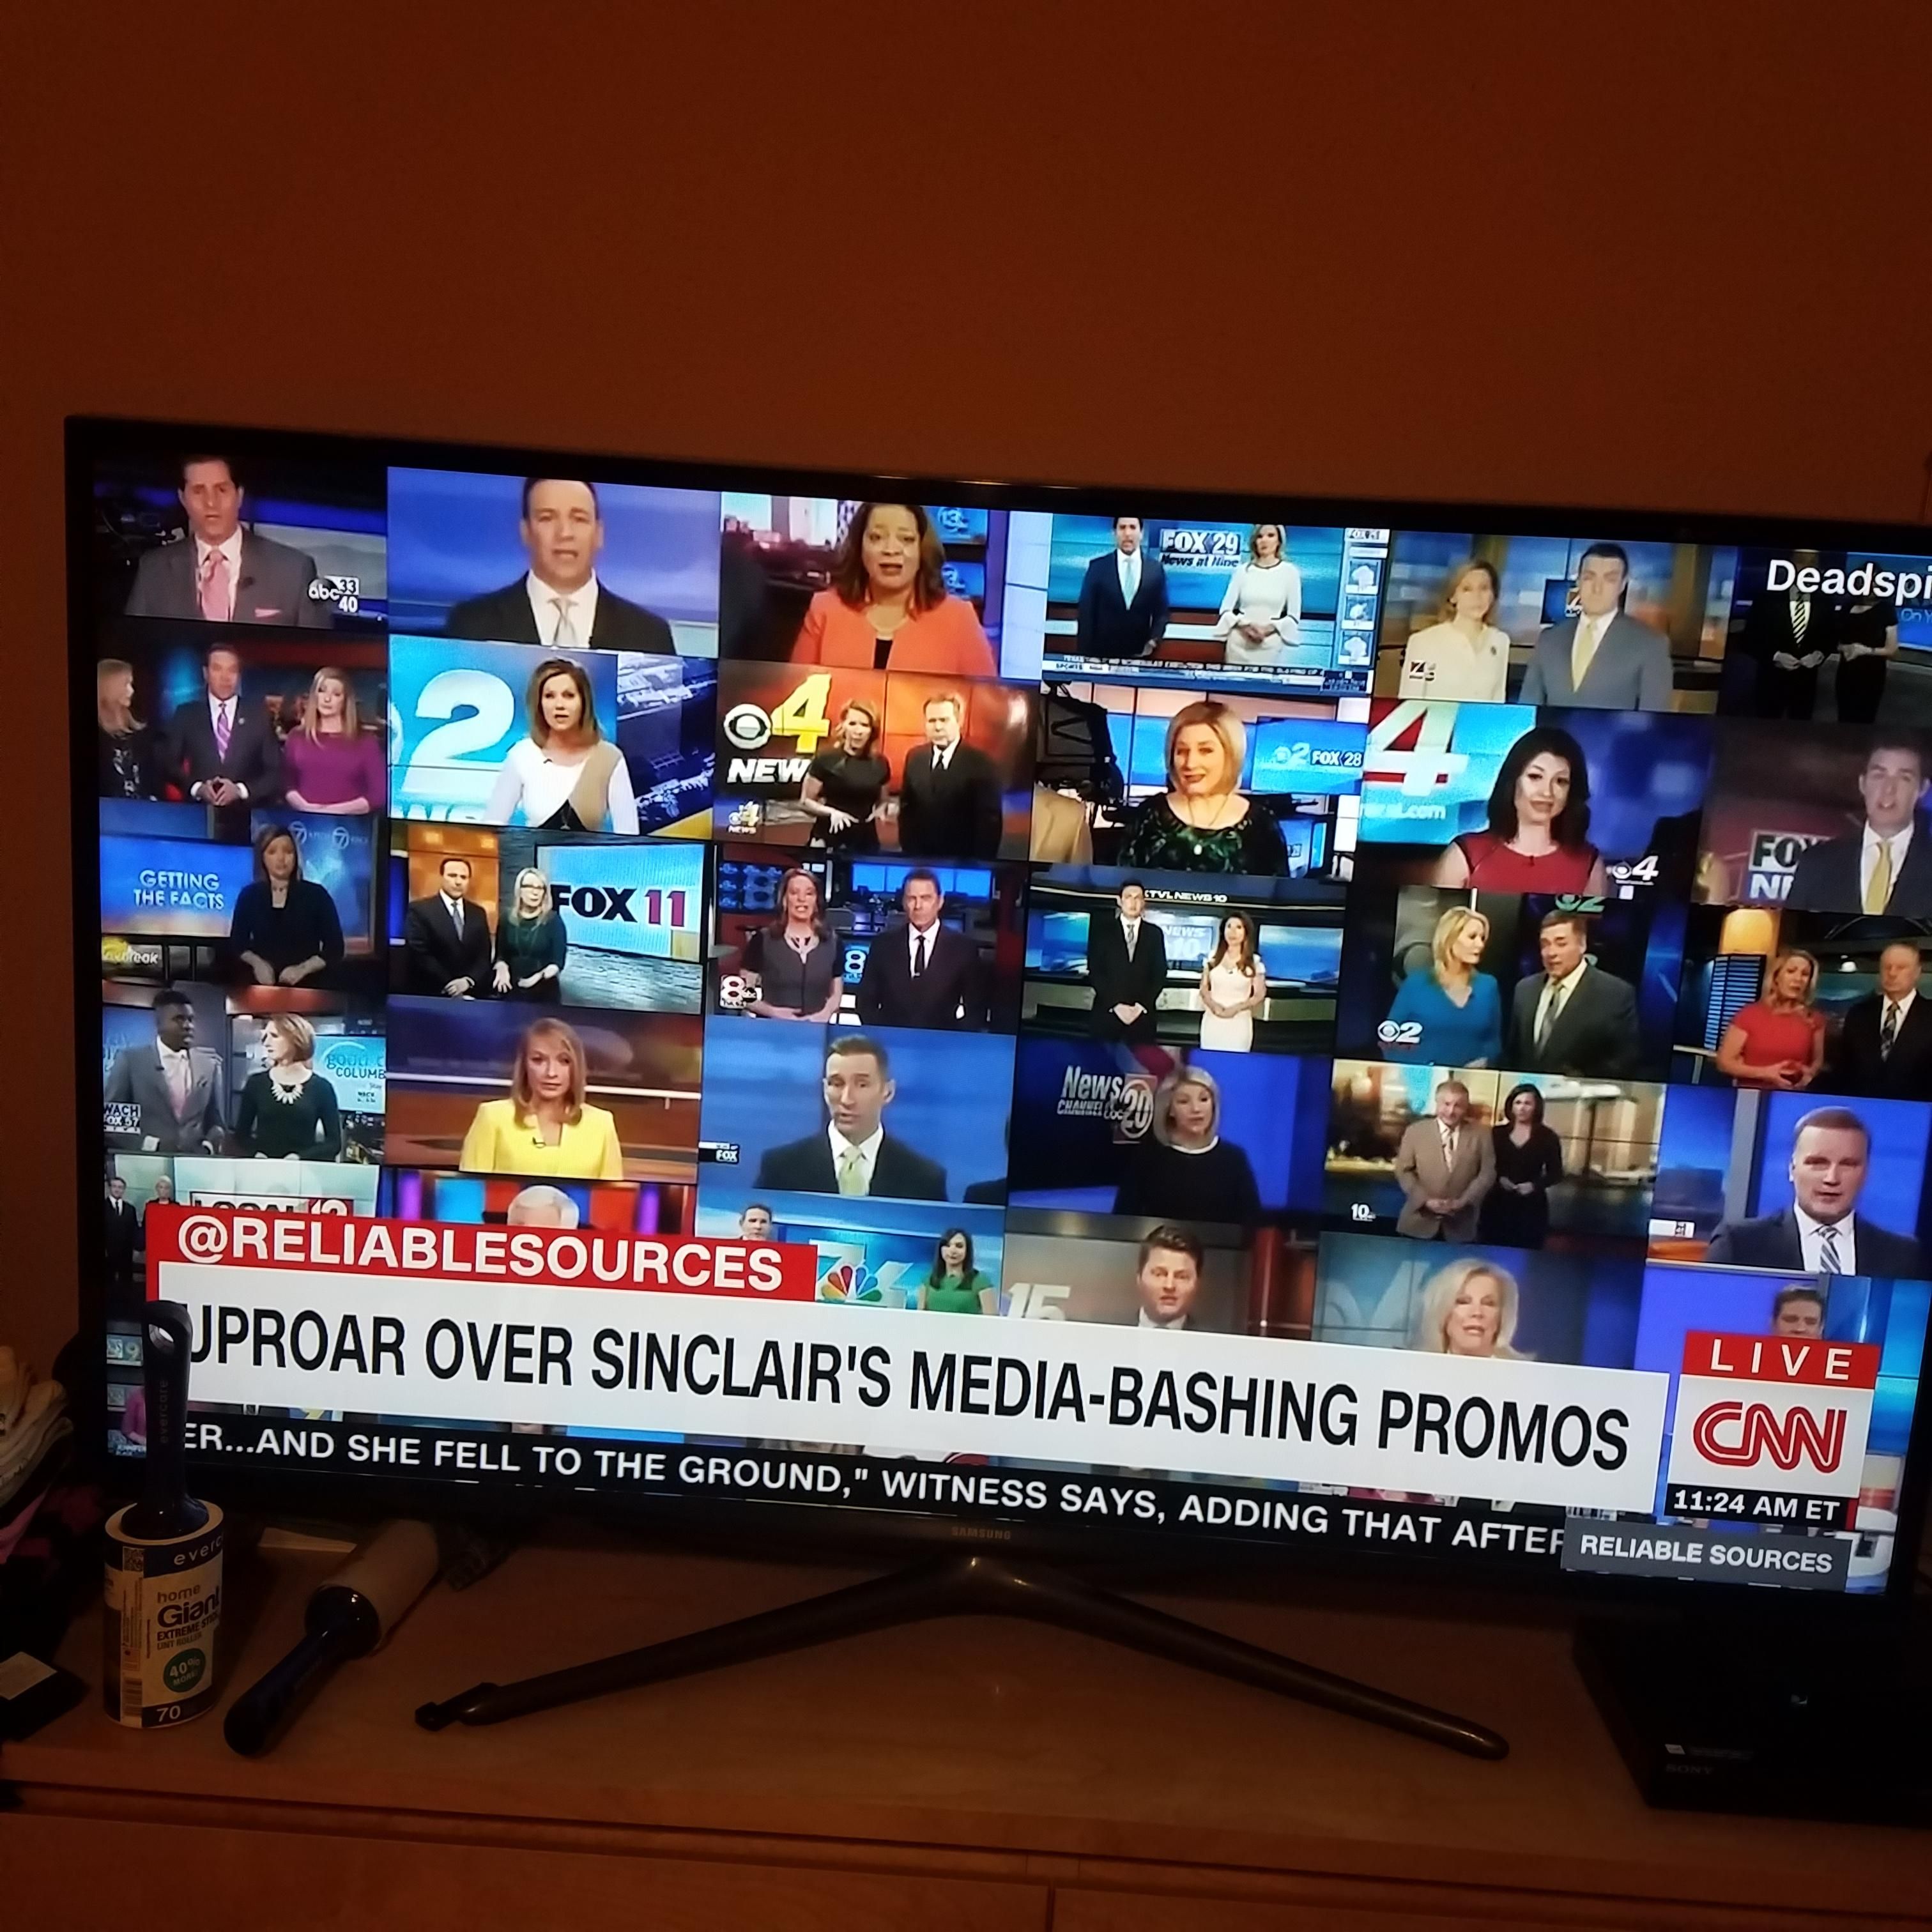 Cnn just played the Sinclair video with all the anchors saying the message at the same time